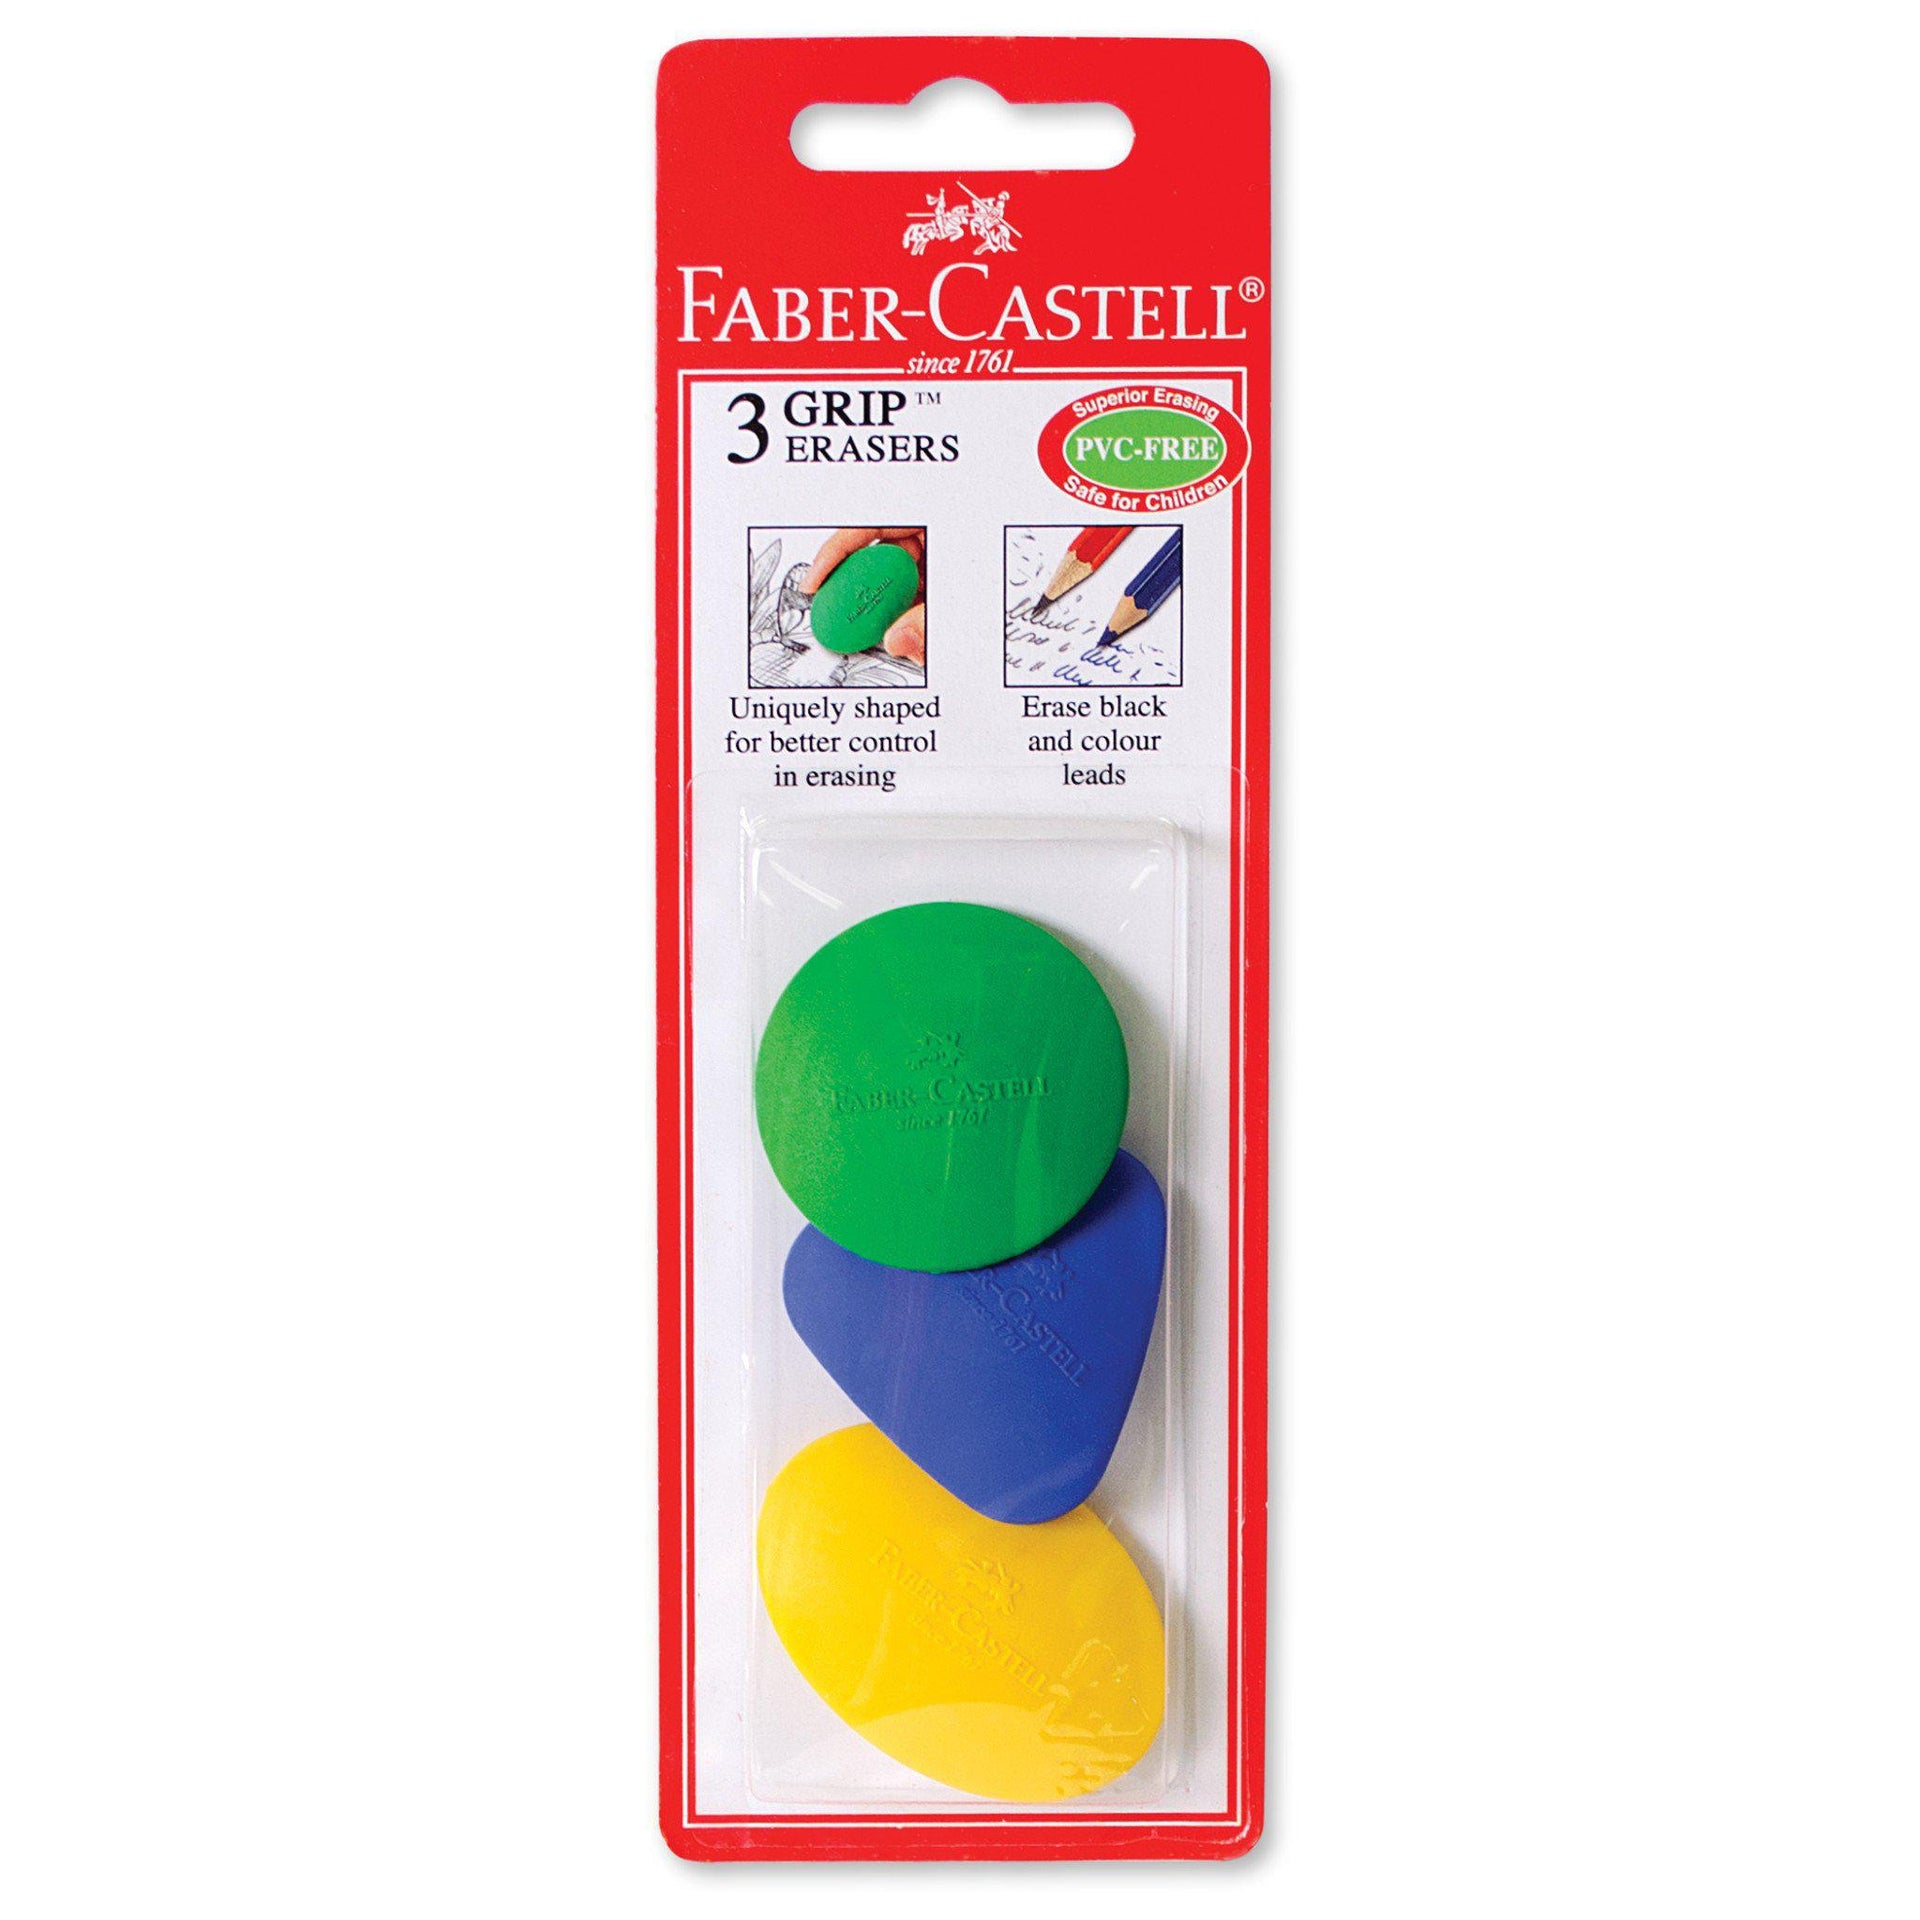 Faber-Castell eraser 7005-40, where to buy + numbering explained? See  comment. : r/erasers